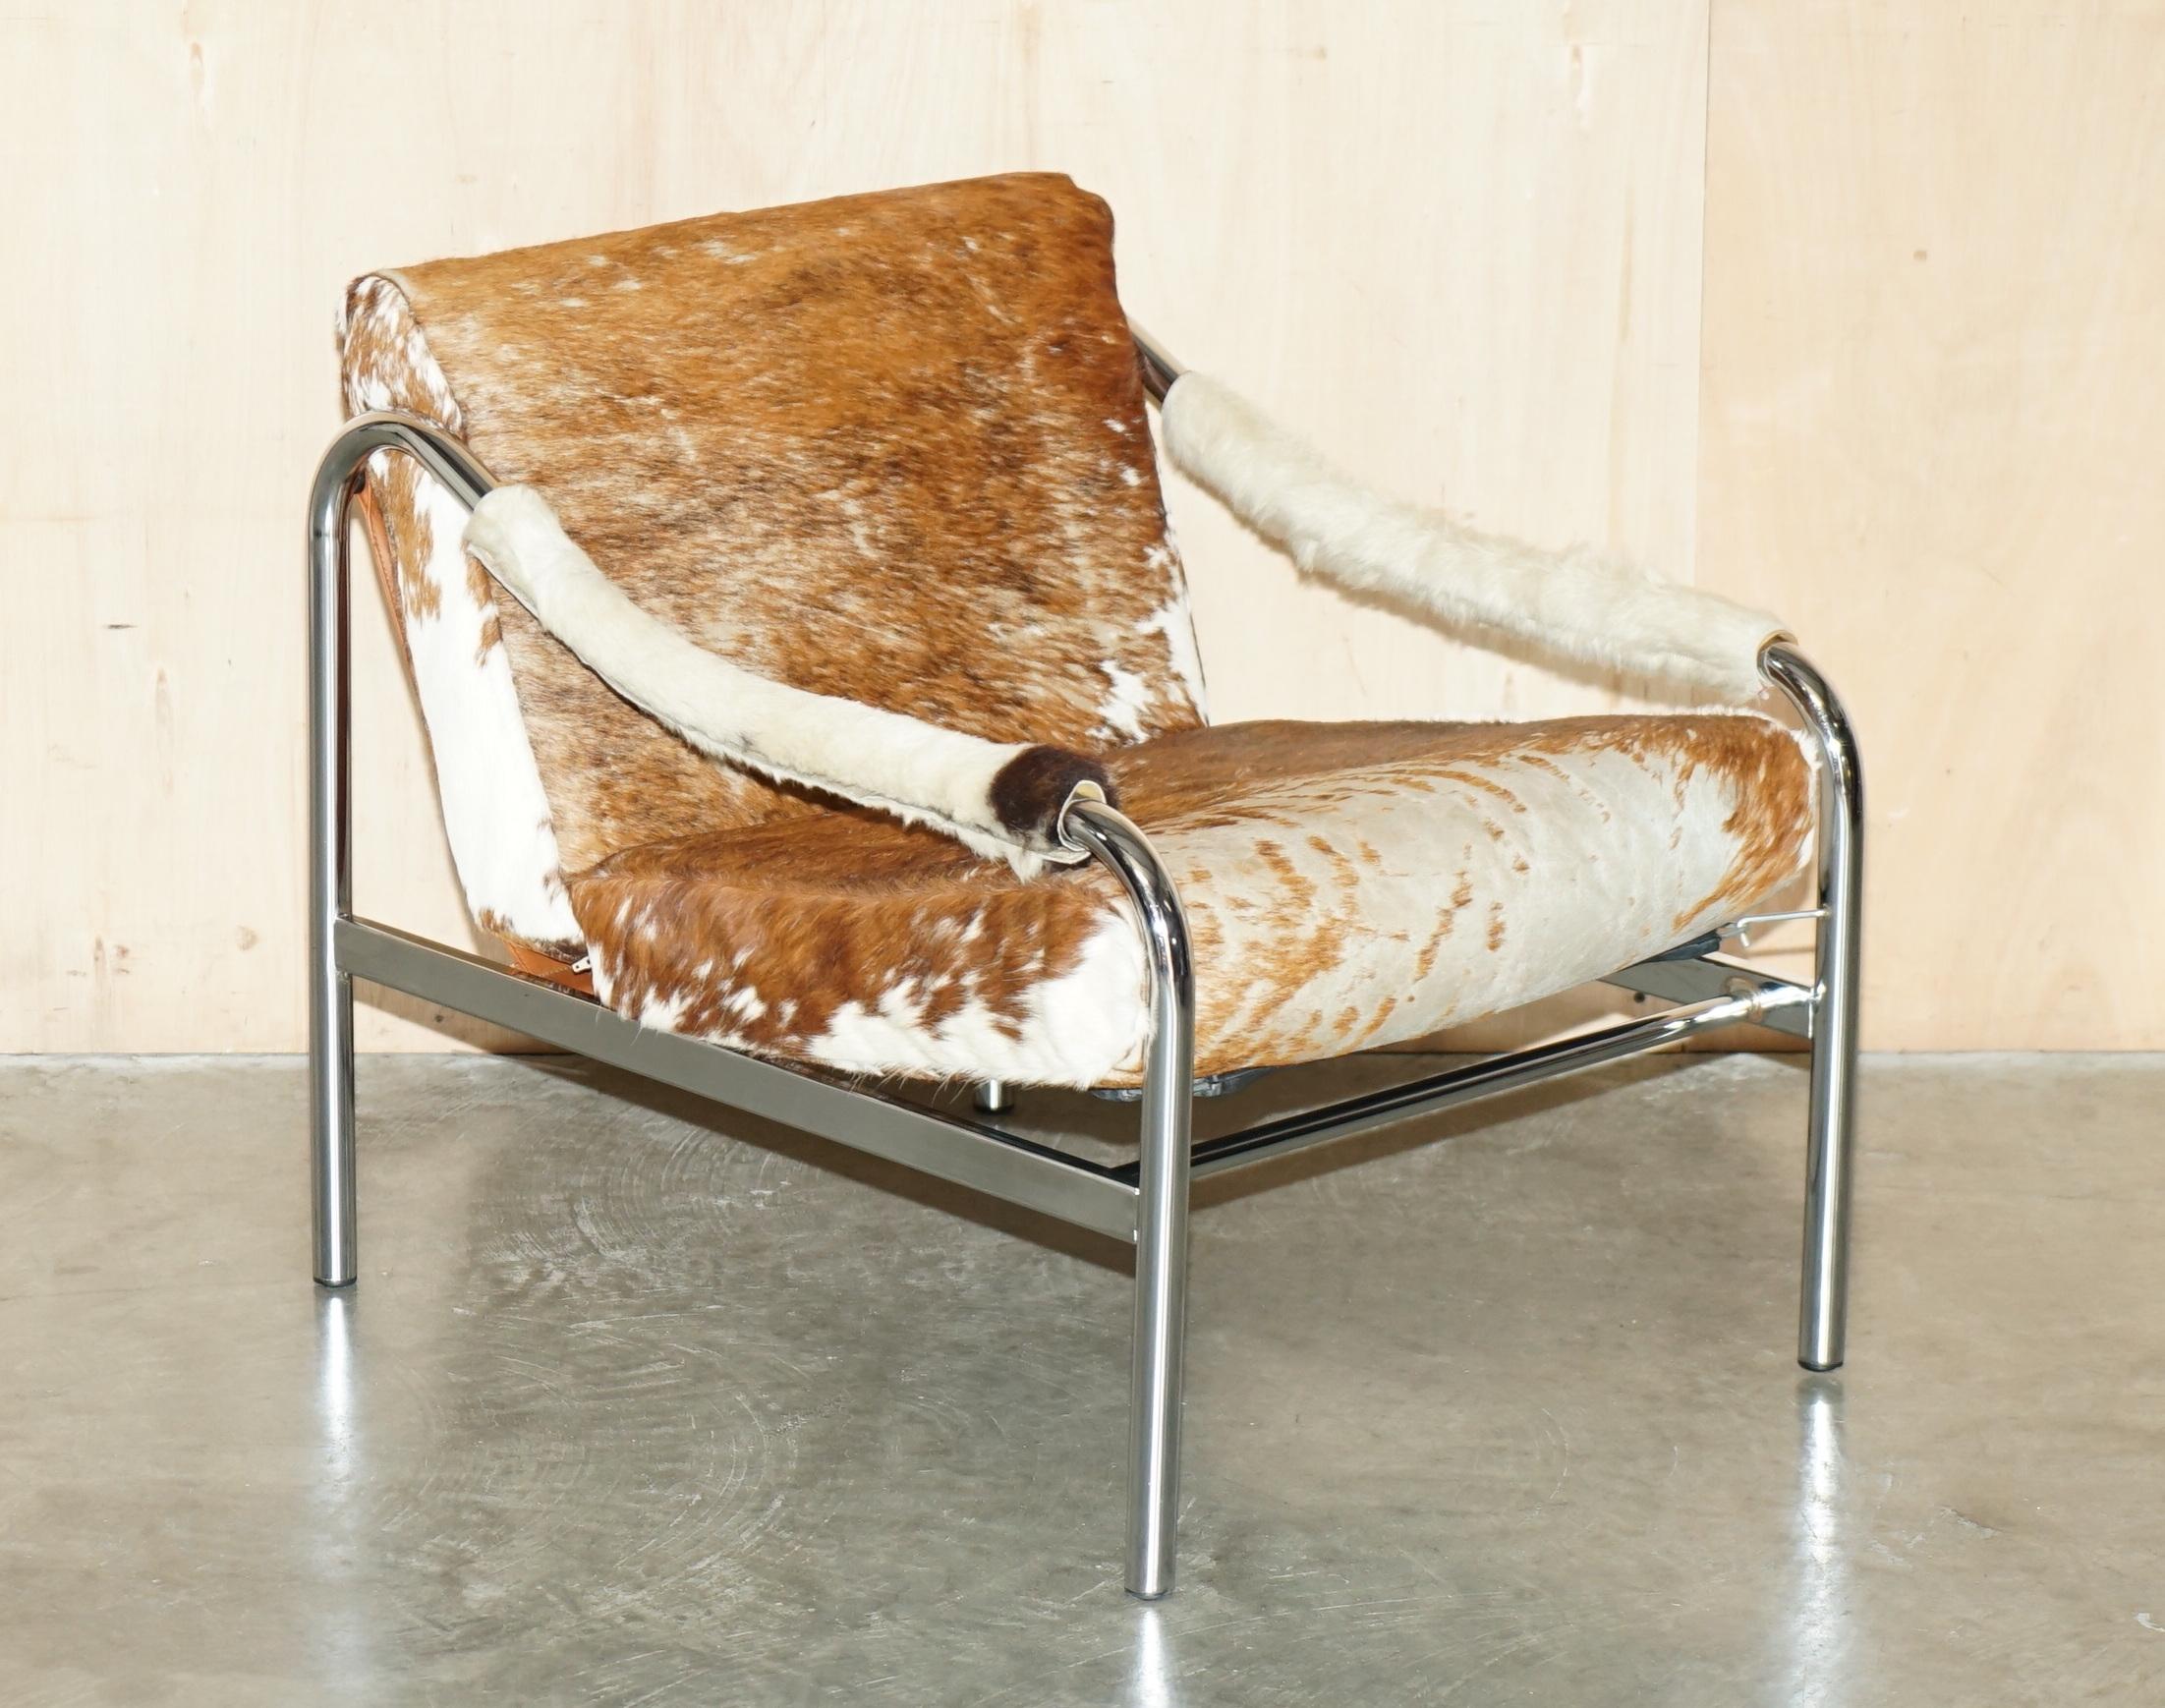 Royal House Antiques

Royal House Antiques is delighted to offer for sale this stylish circa 1960-1970 Tim Bates Designed Pieff retailed Beta armchair which has a chrome frame and Cow Hide leather upholstery 

Please note the delivery fee listed is